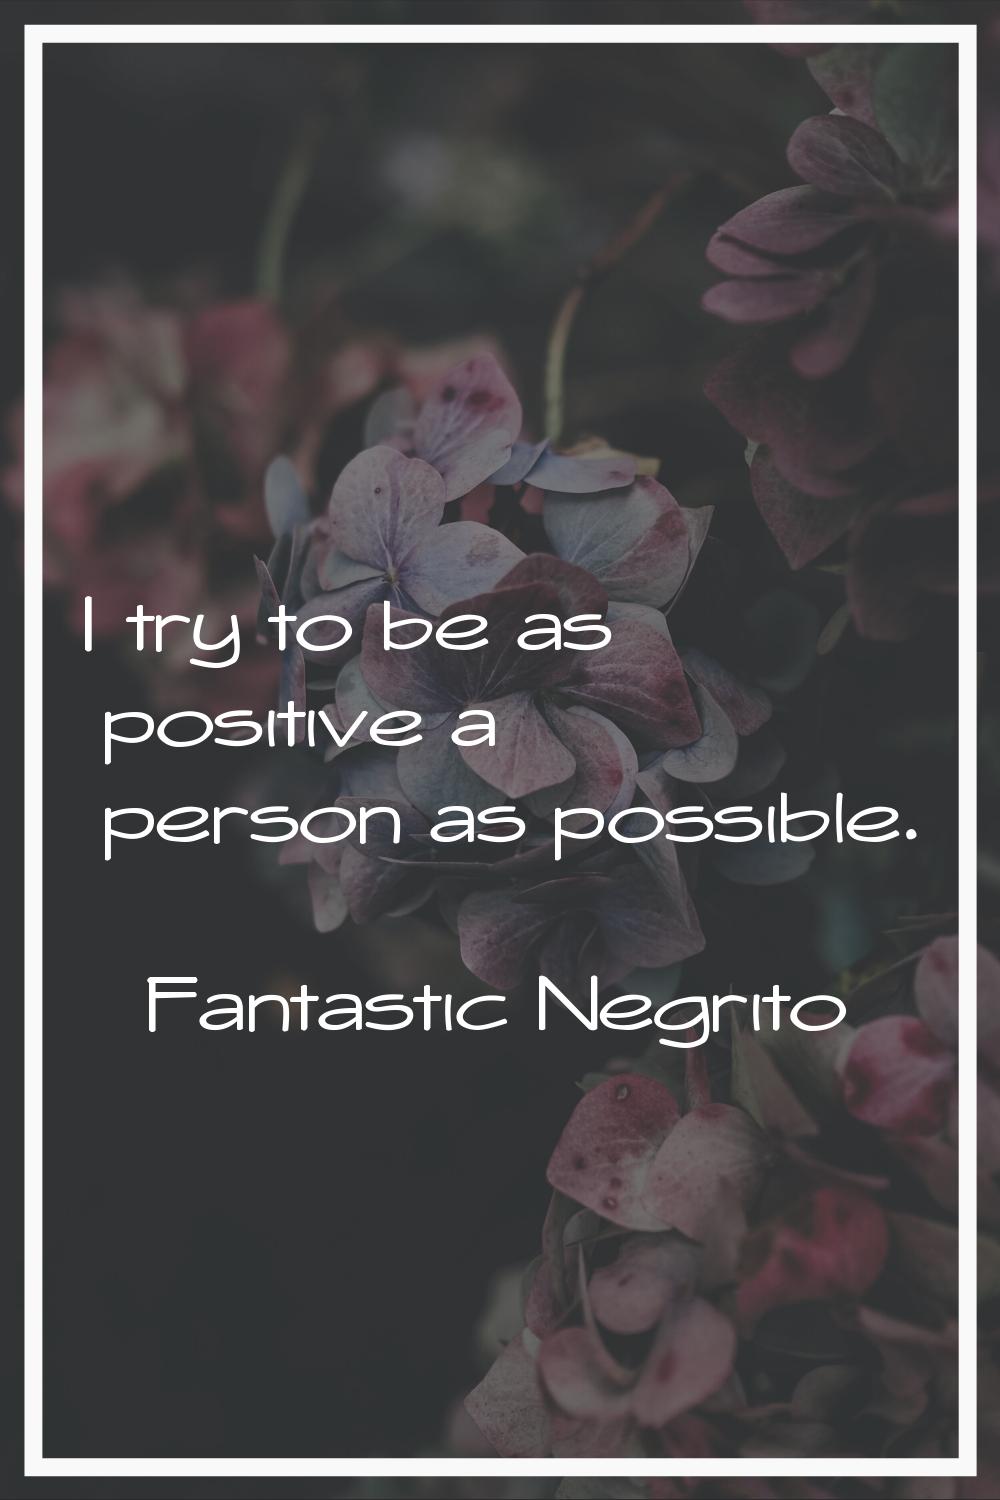 I try to be as positive a person as possible.